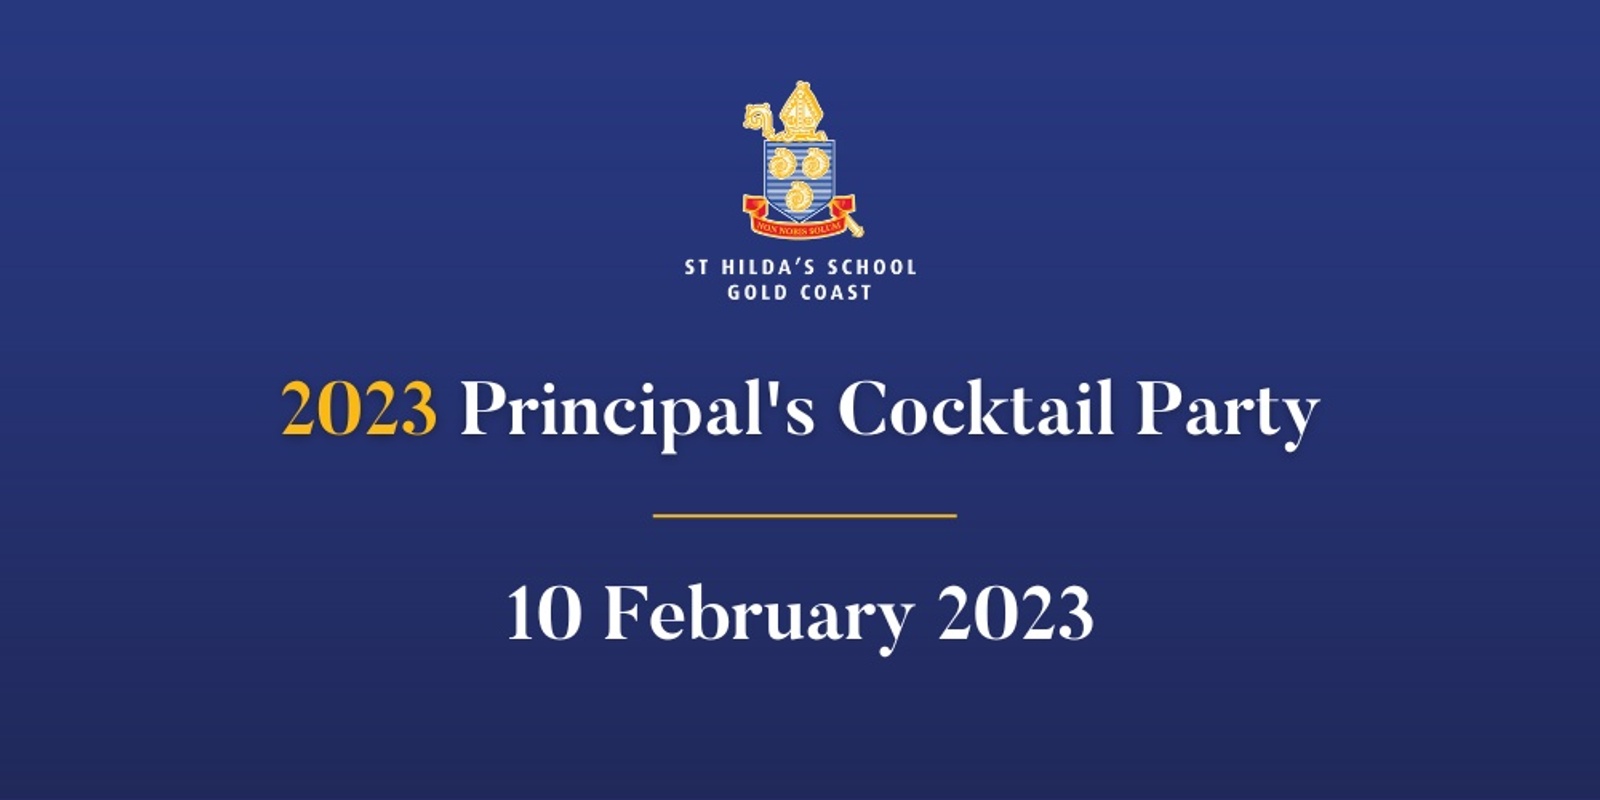 Banner image for Principal's Cocktail Party